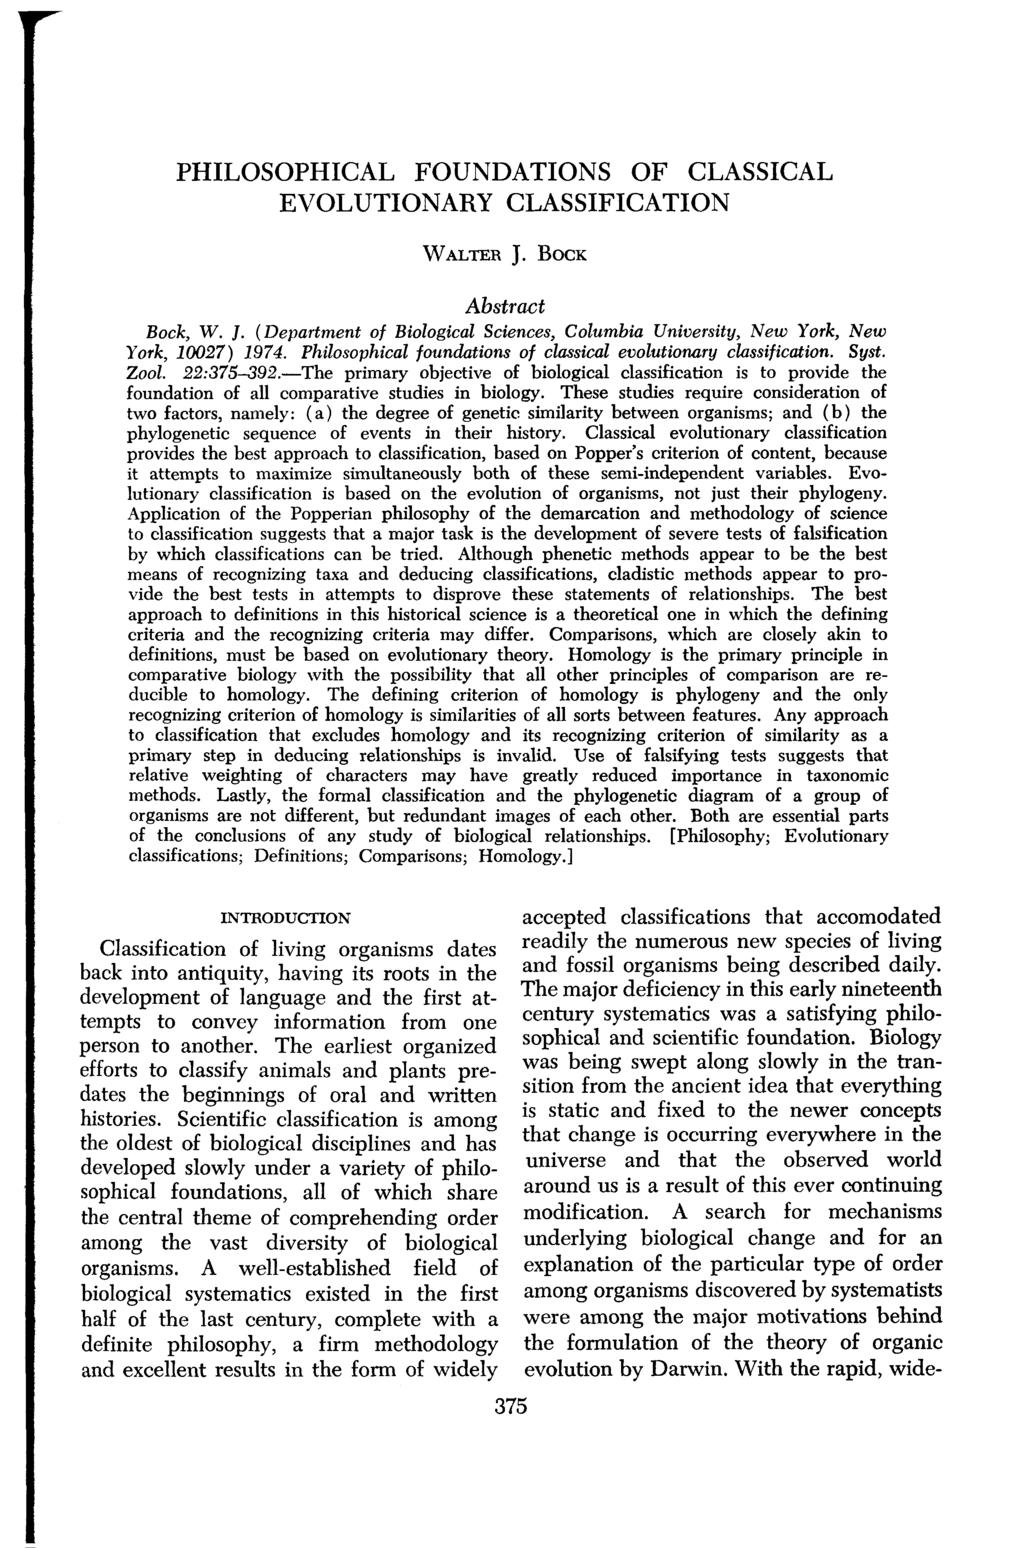 PHILOSOPHICAL FOUNDATIONS OF CLASSICAL EVOLUTIONARY CLASSIFICATION WALTER J. BOCK Abstract Bock, W. J. (Department of Biological Sciences, Columbia University, New York, New York, 10027) 1974.